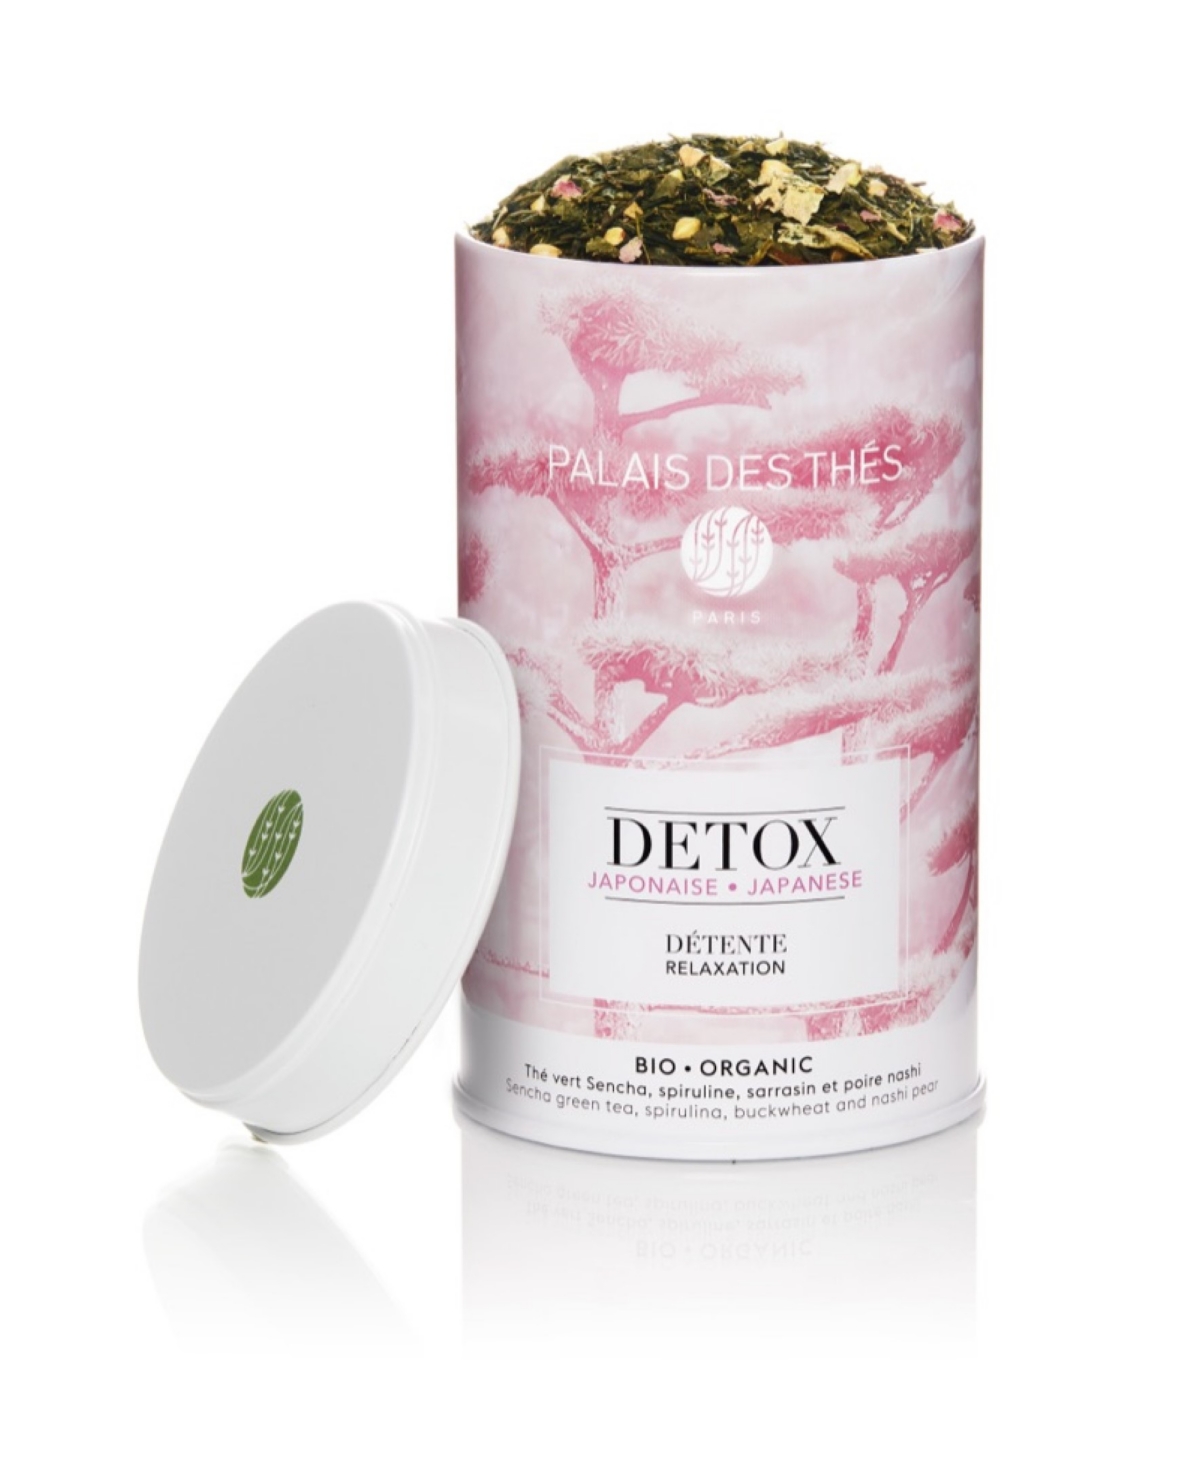 Palais Des Thes Japanese Detox Relaxation Loose Leaf Tin, 3.5 oz In No Color